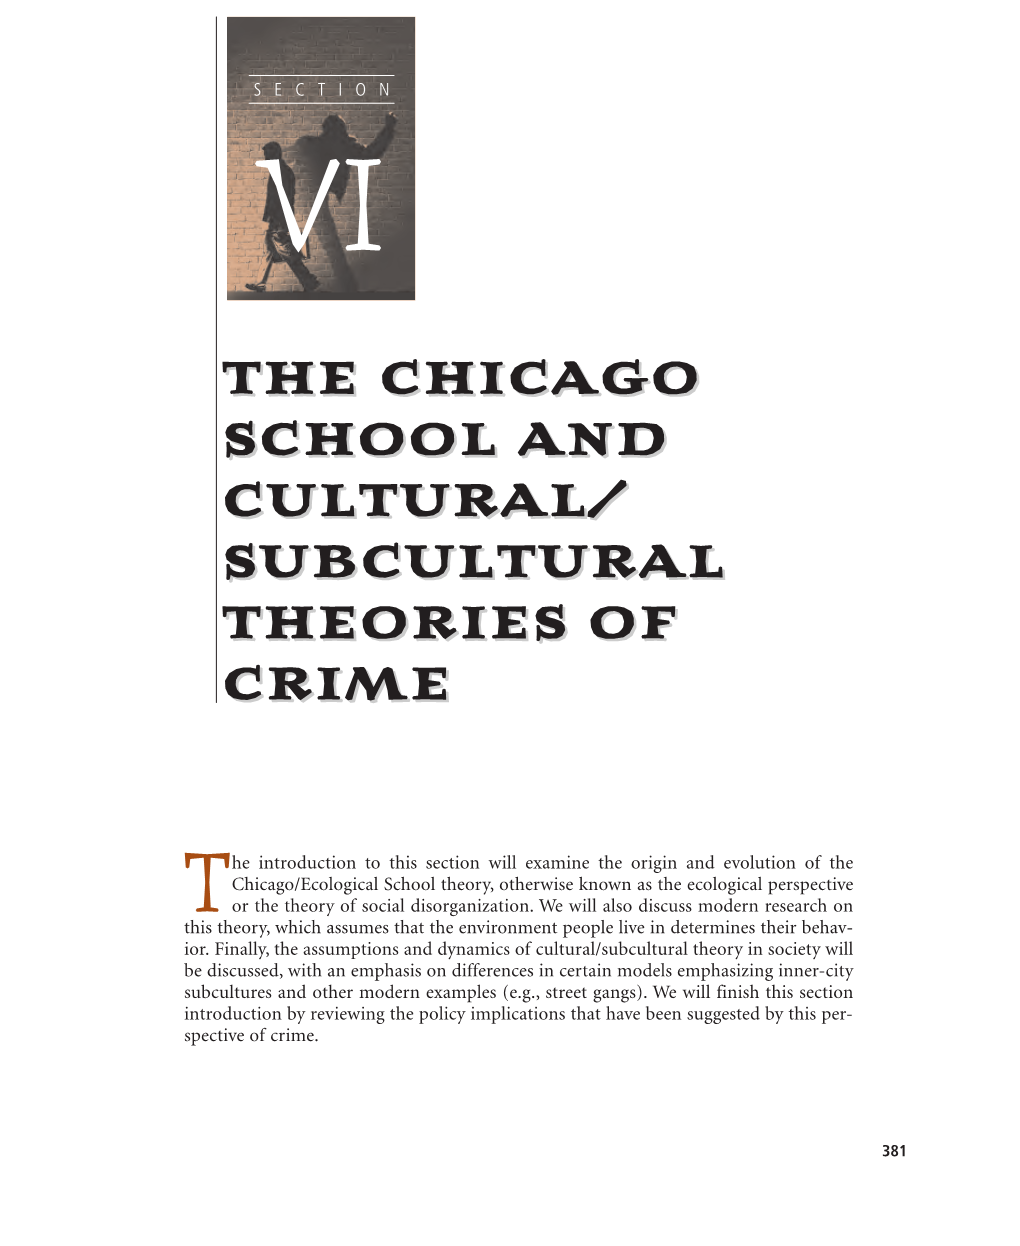 Chicago School of Criminology, Which Is Otherwise Known As the Ecological Perspective Or Theory of Social Disorganization, for Reasons That Will Become Very Clear